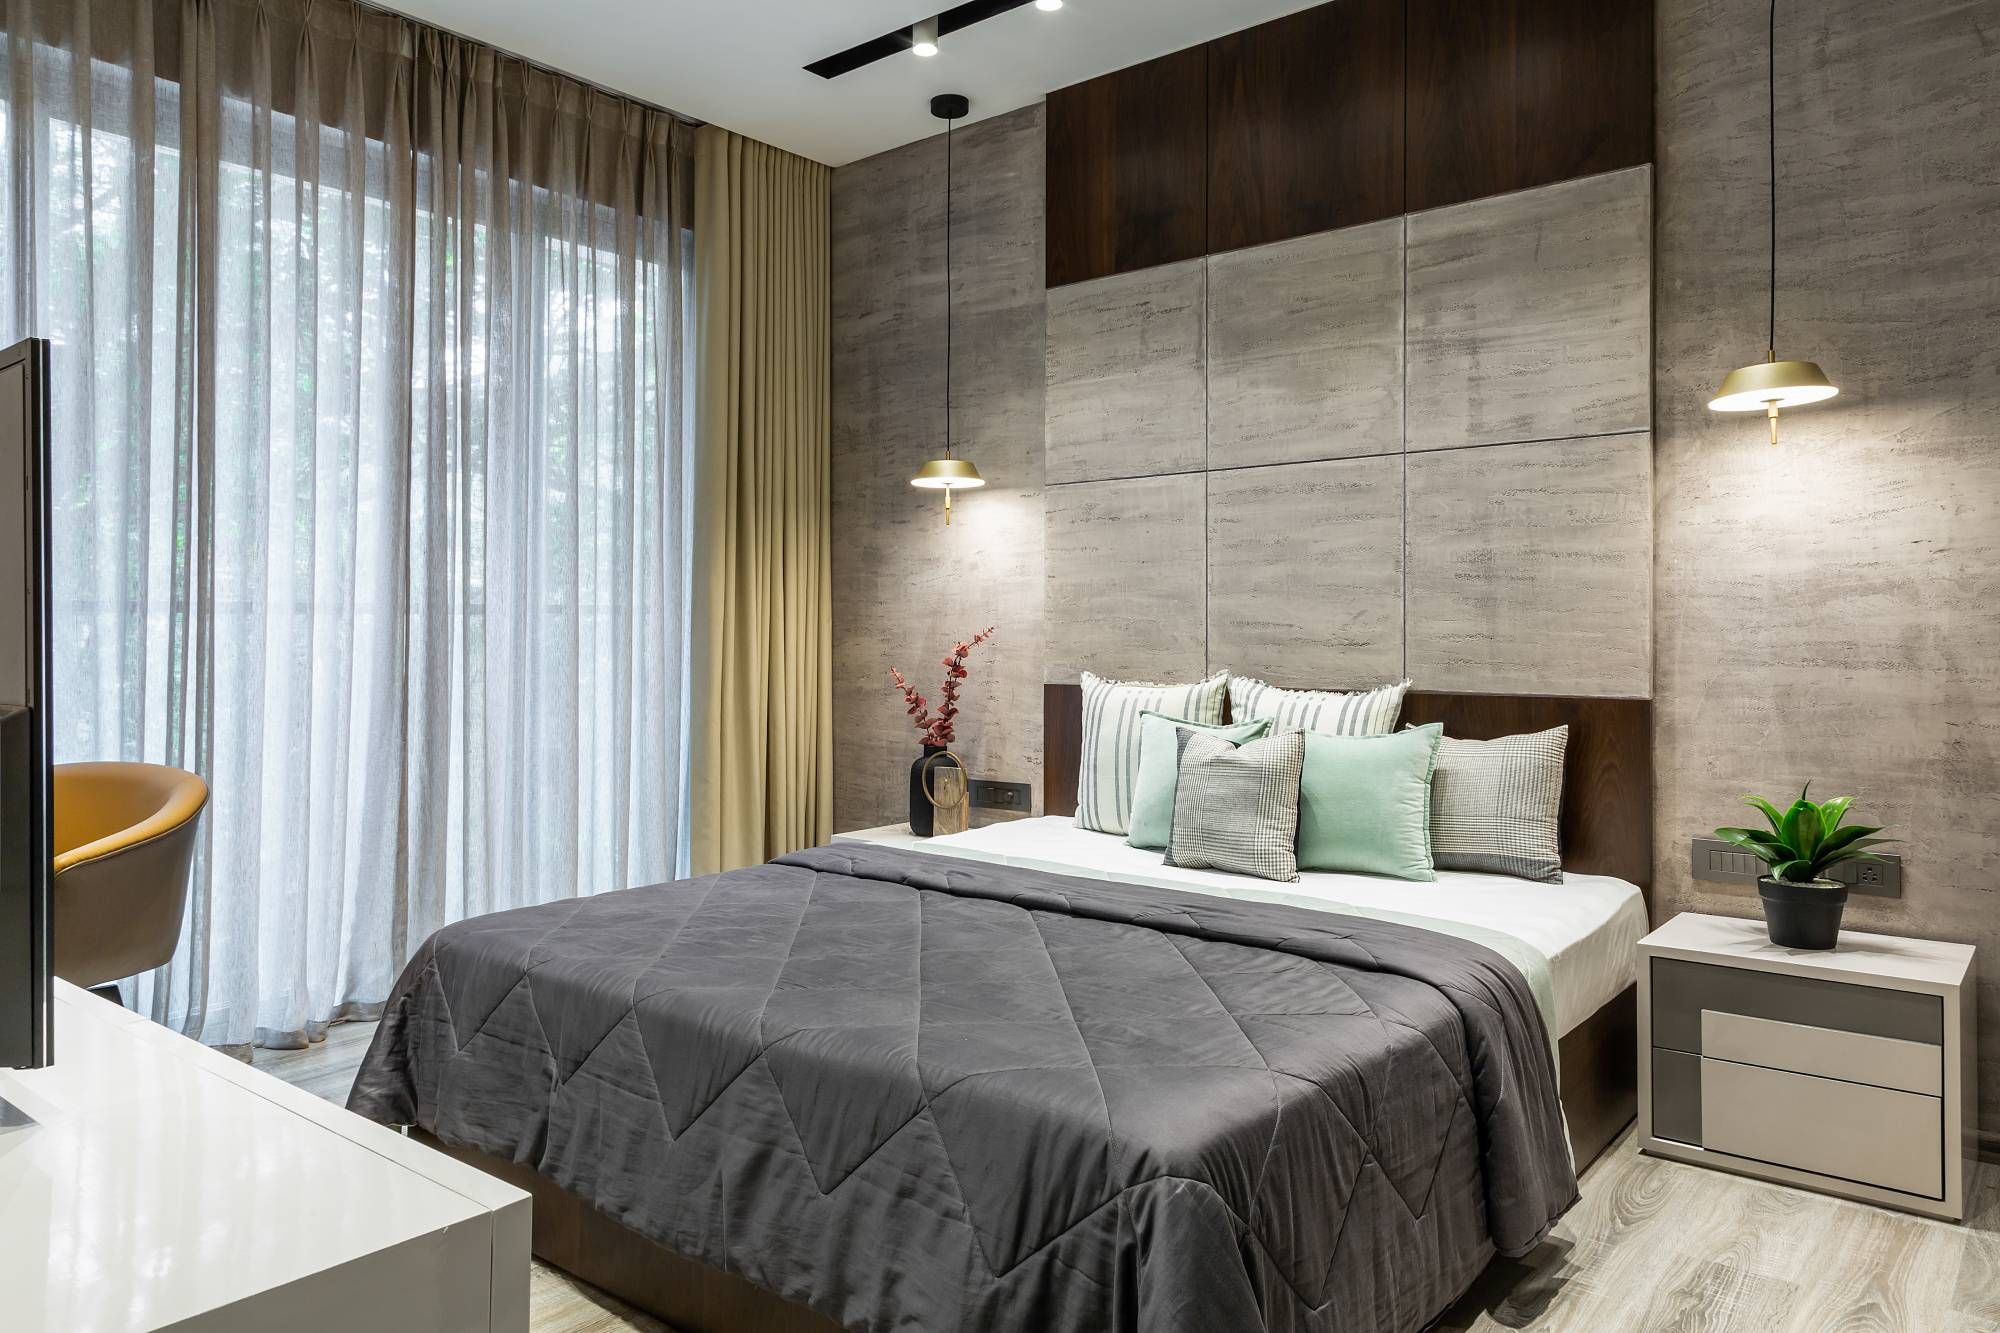 Modern Bedroom Design With A King Size Bed And Textured Wall Panelling